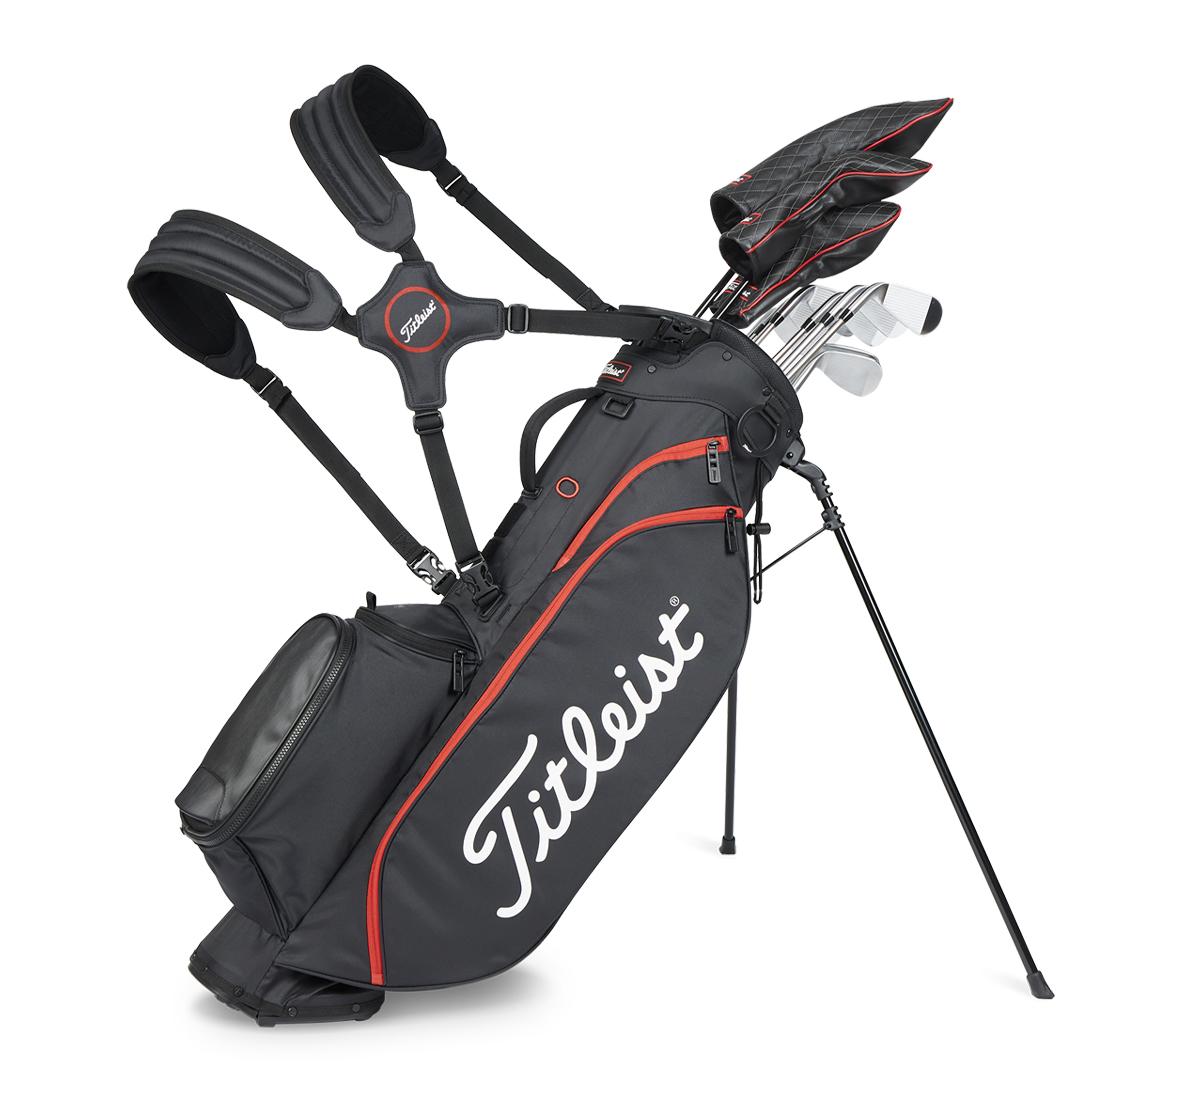 NEW Titleist Golf LinksLegend Members Stand Bag 4-way Top - Pick Color